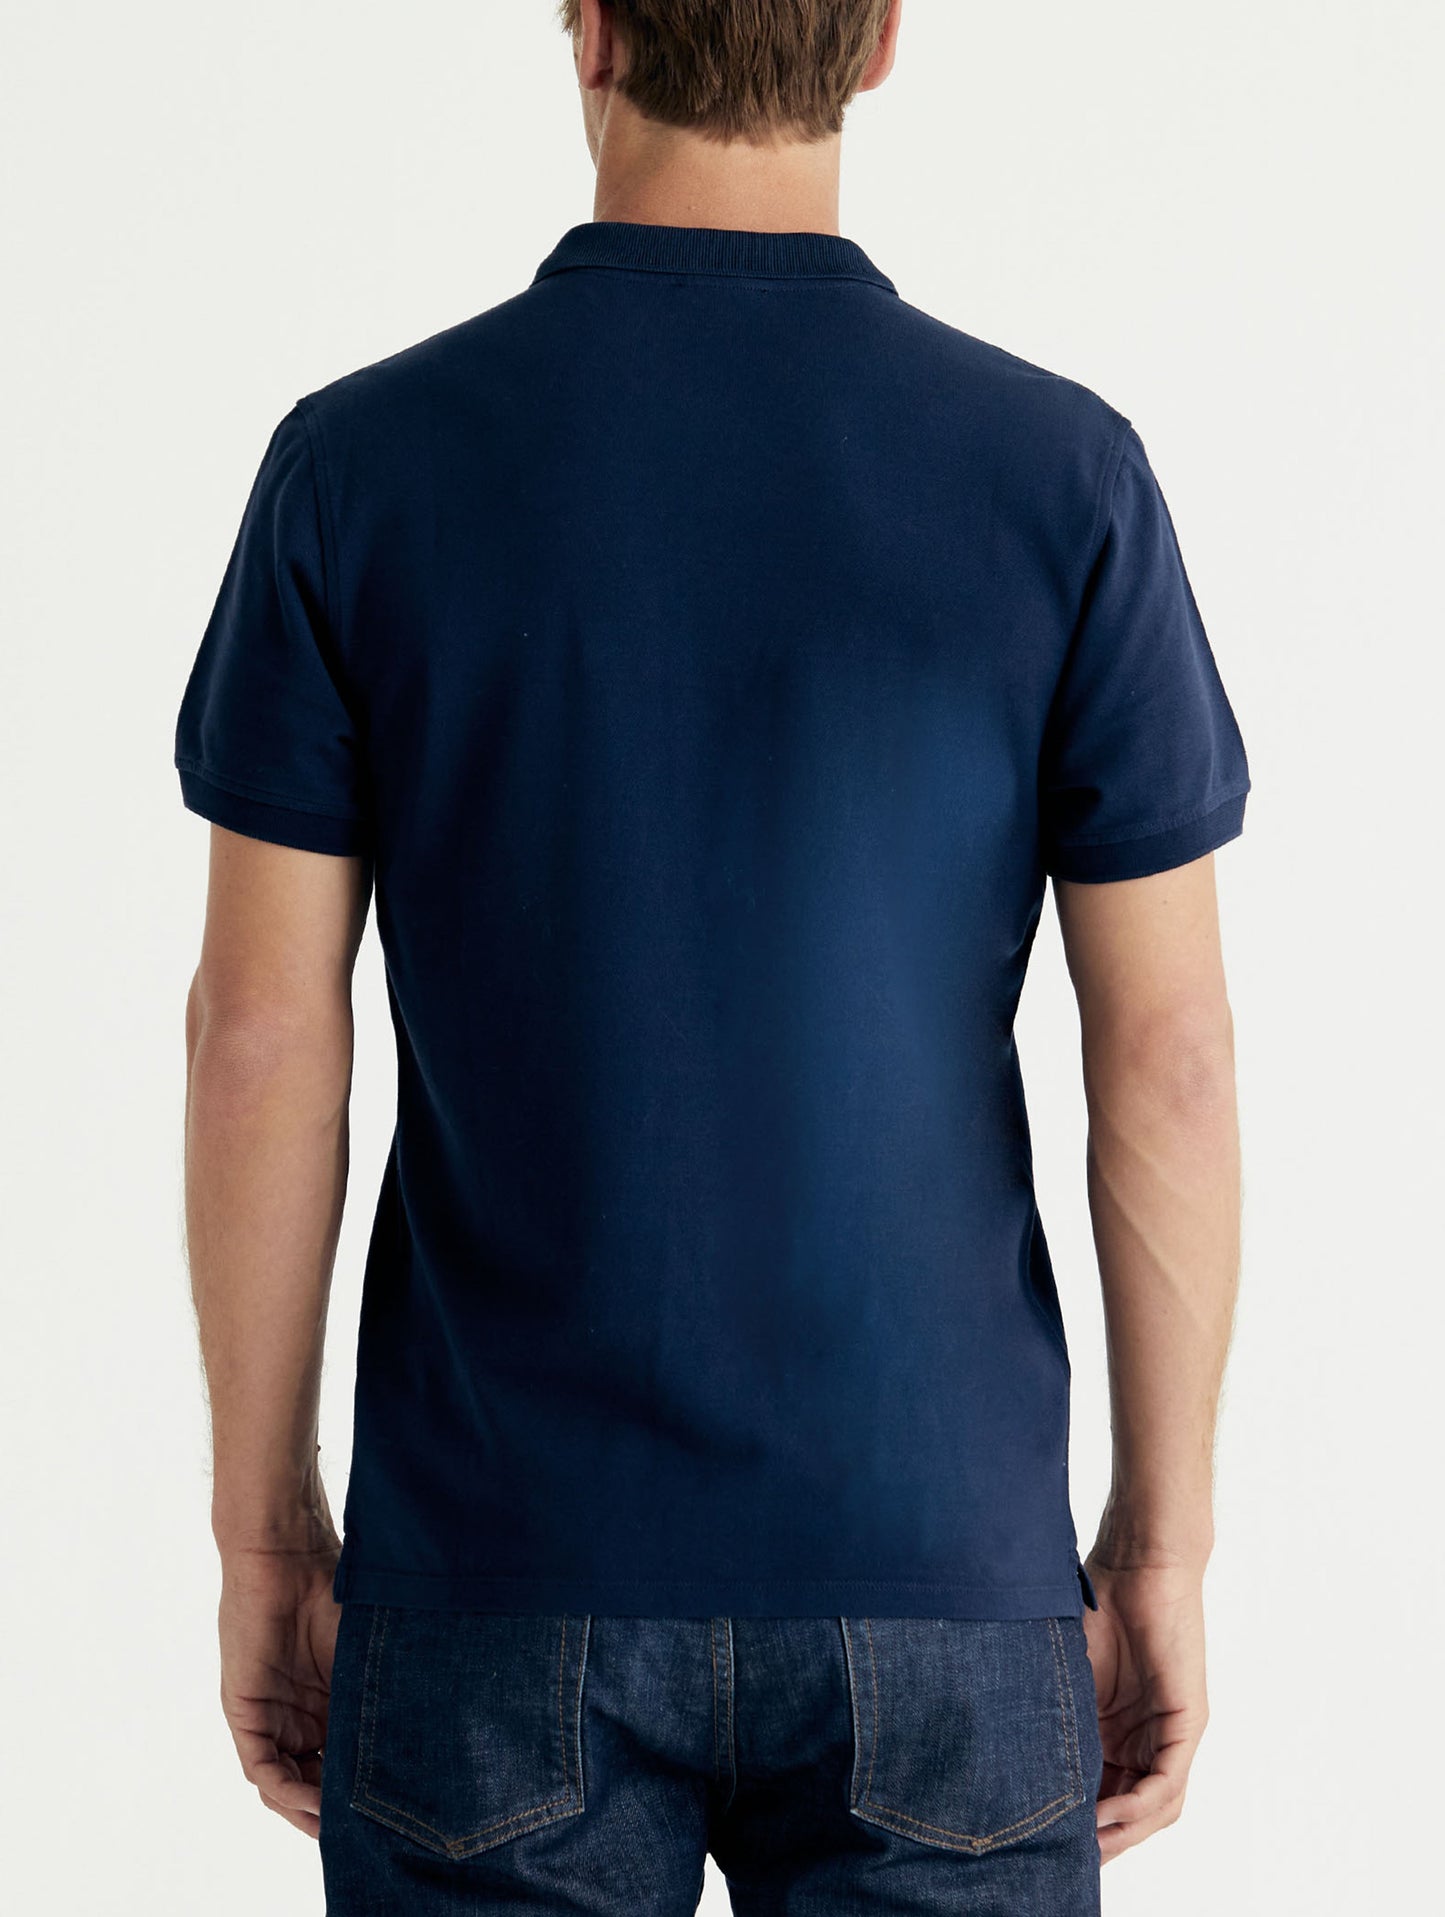 polo shirt for men from Aether Apparel